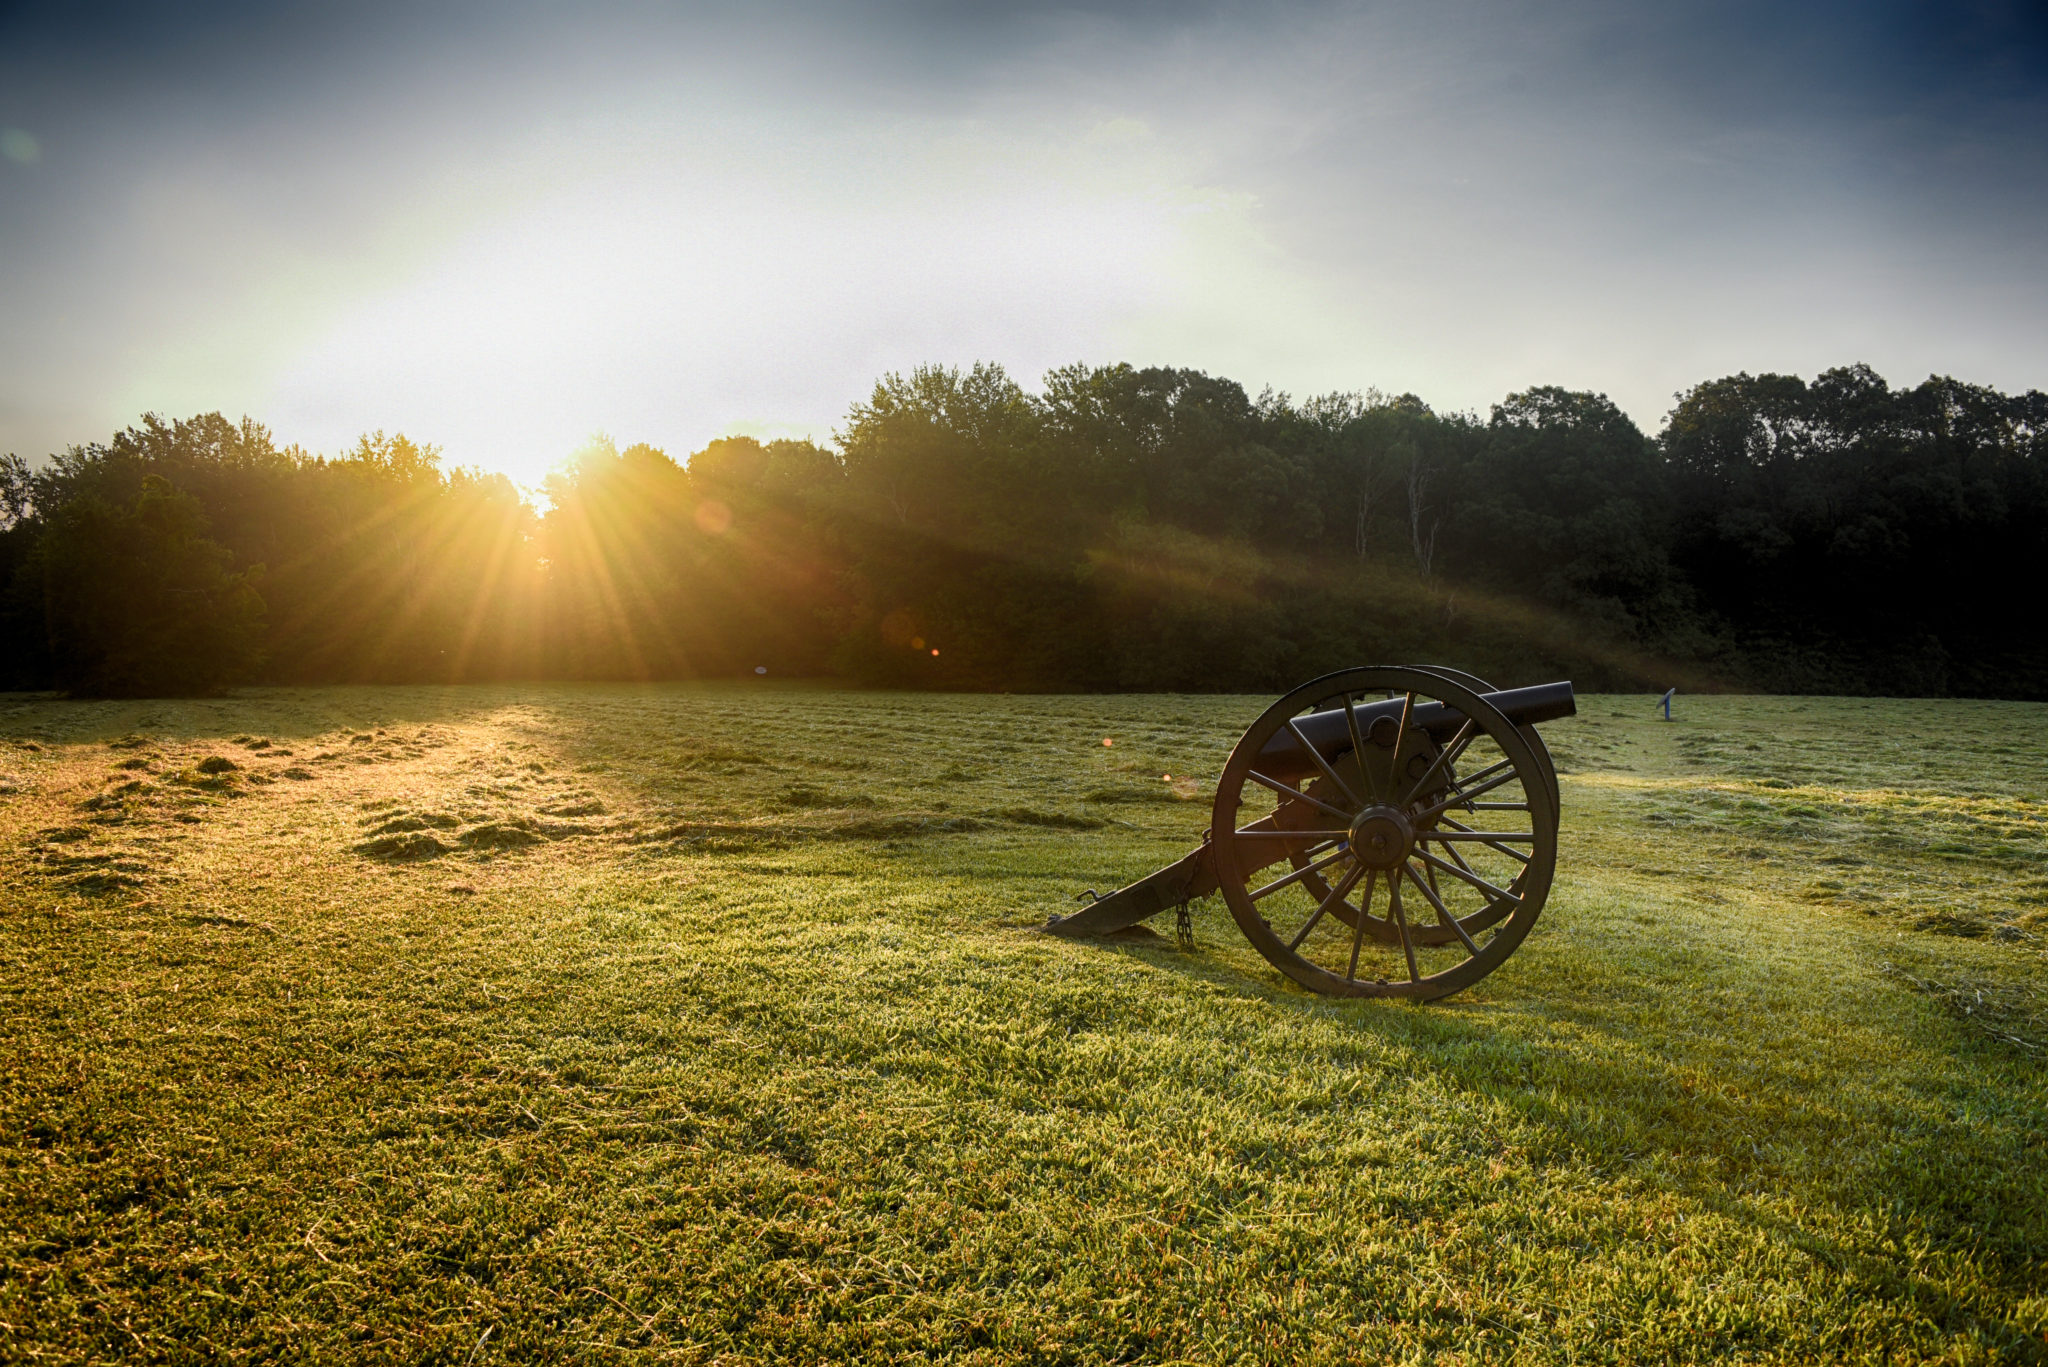 From States’ Rights to Slavery: What Caused the American Civil War?